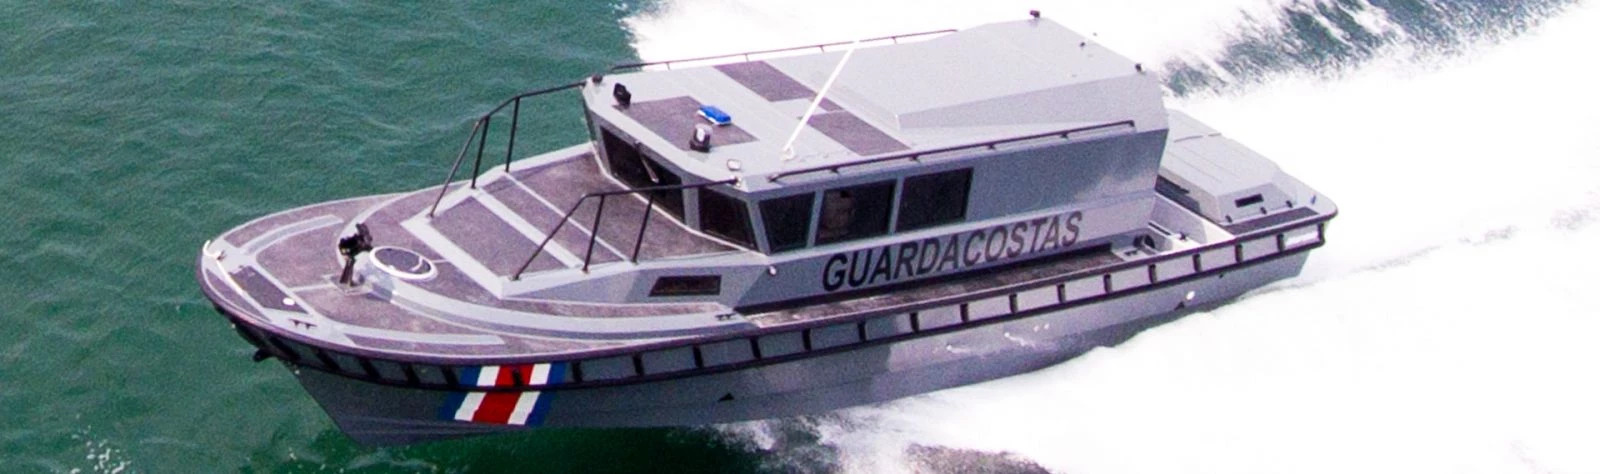  United States donates Coast Guard station in the Caribbean to Costa Rica. (Photo Internet reproduction)